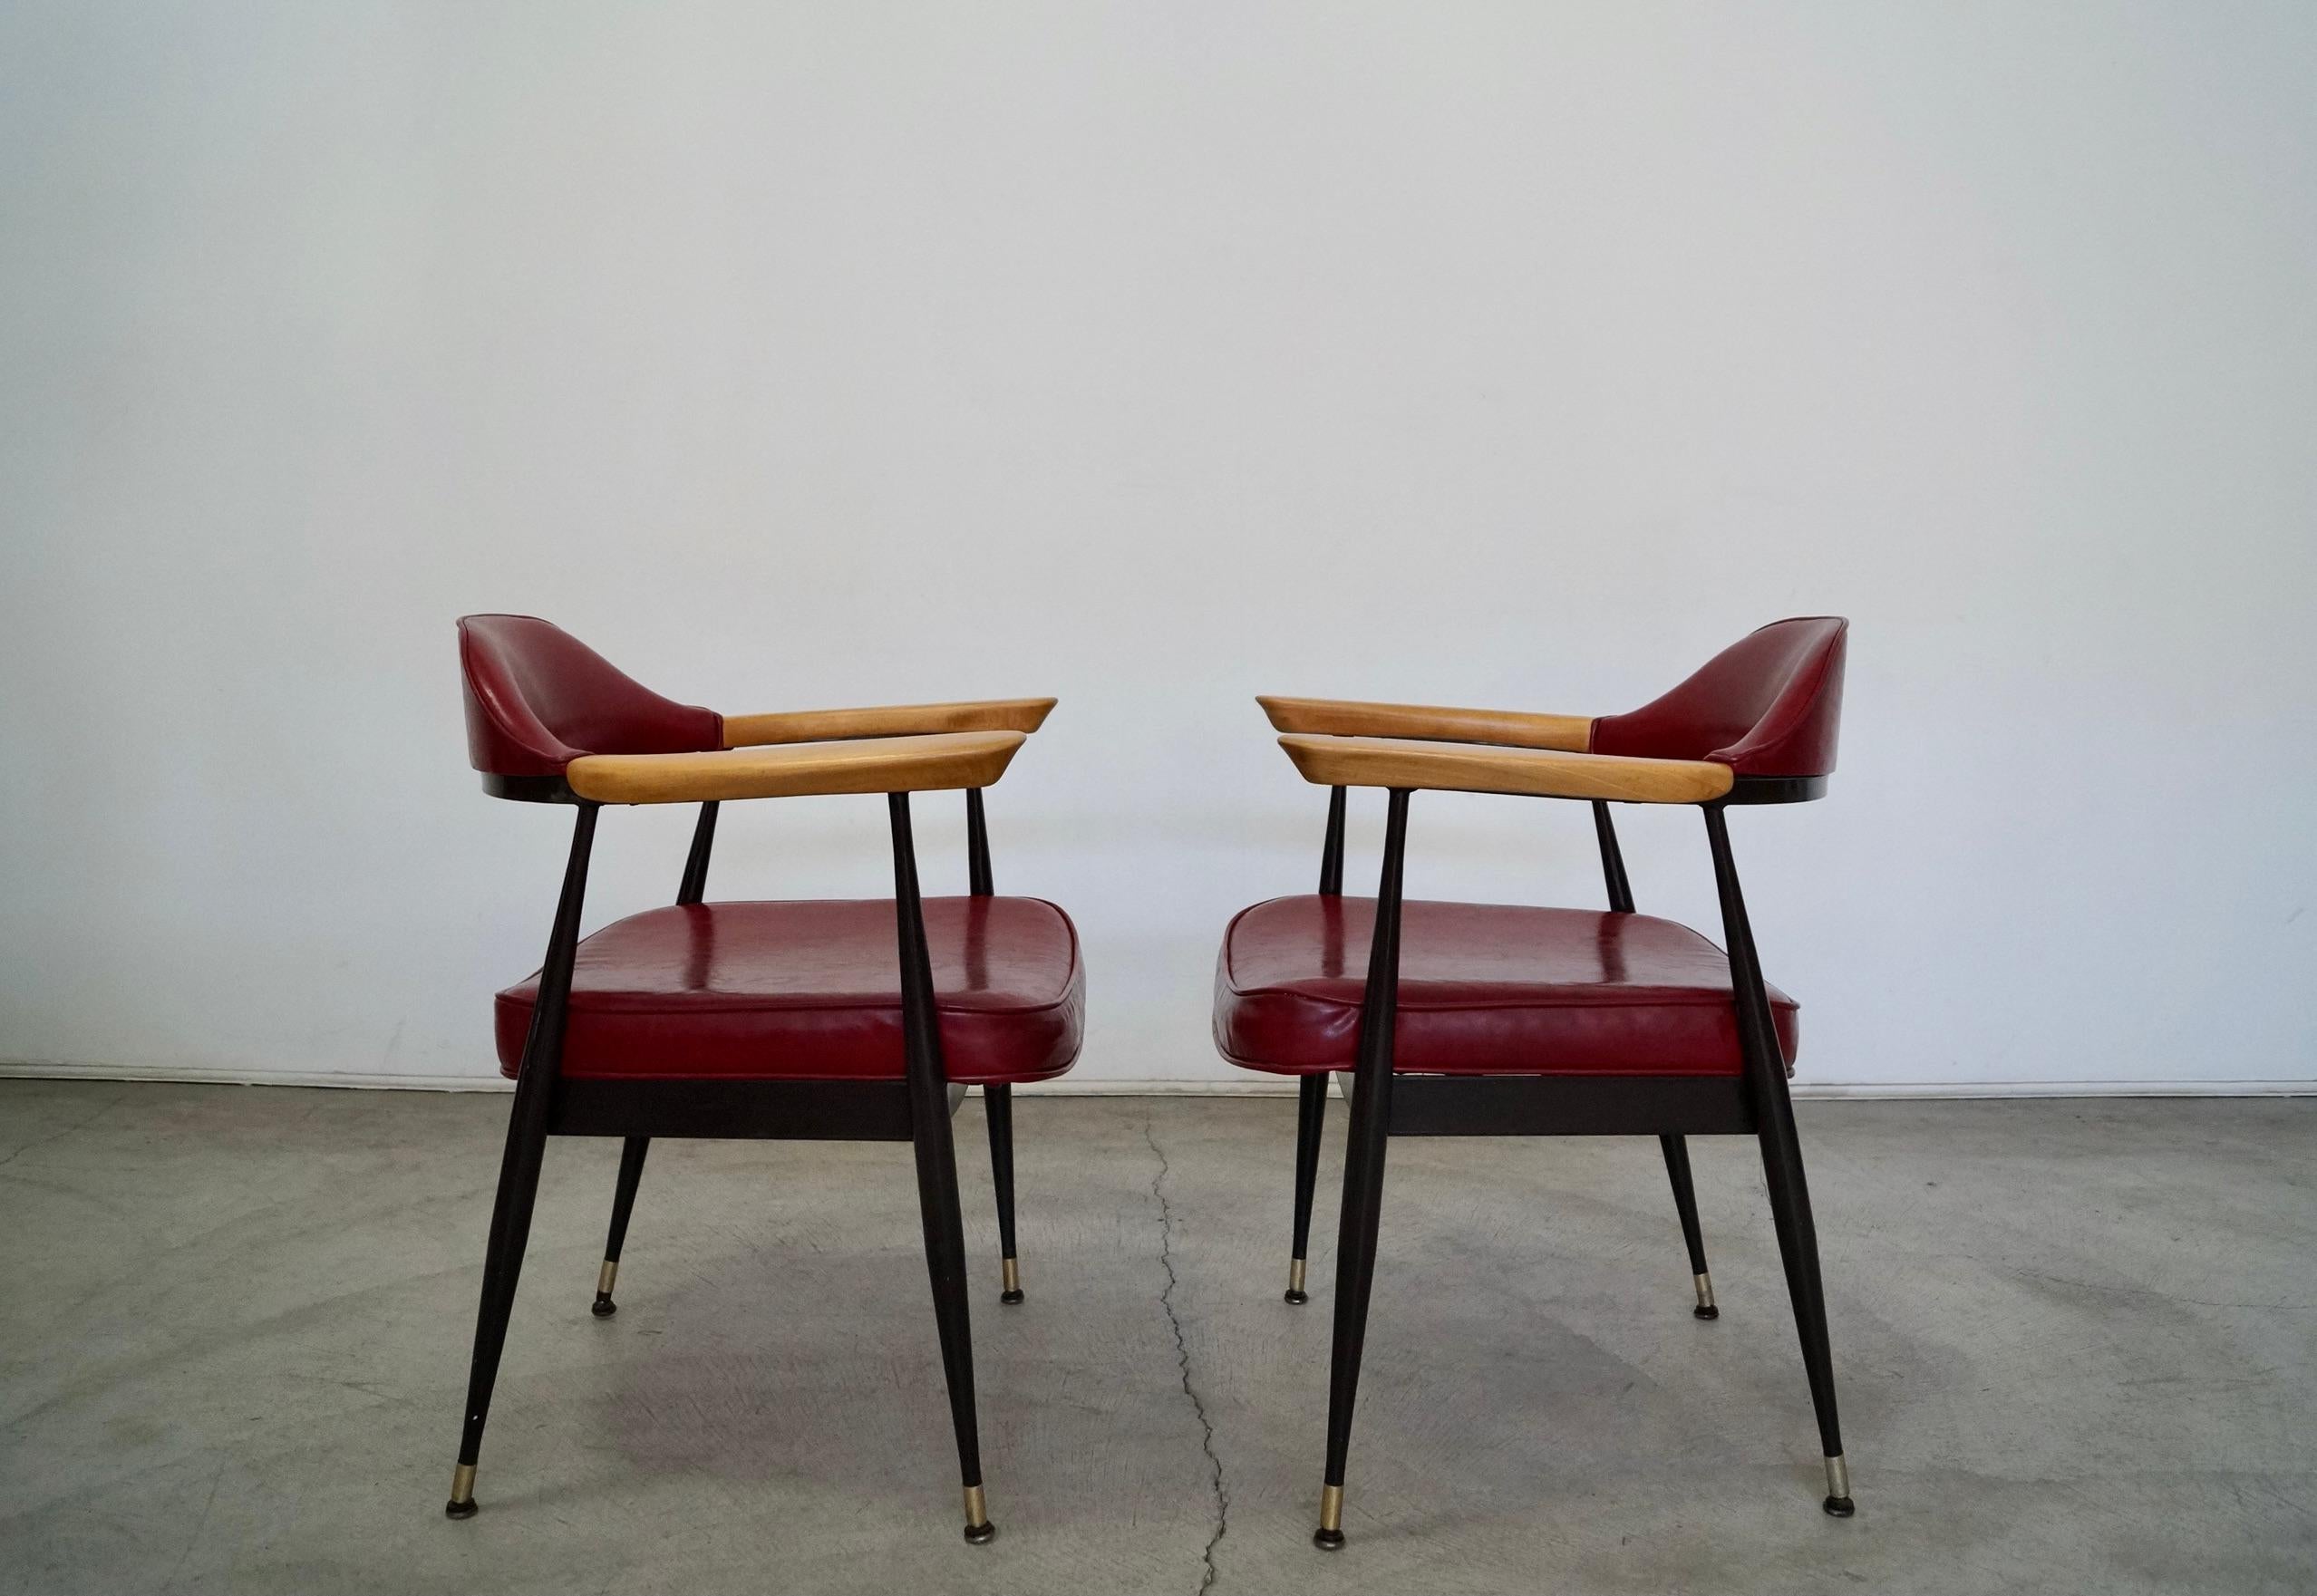 1970's Mid-Century Modern Metal & Wood Armchairs - a Pair For Sale 2